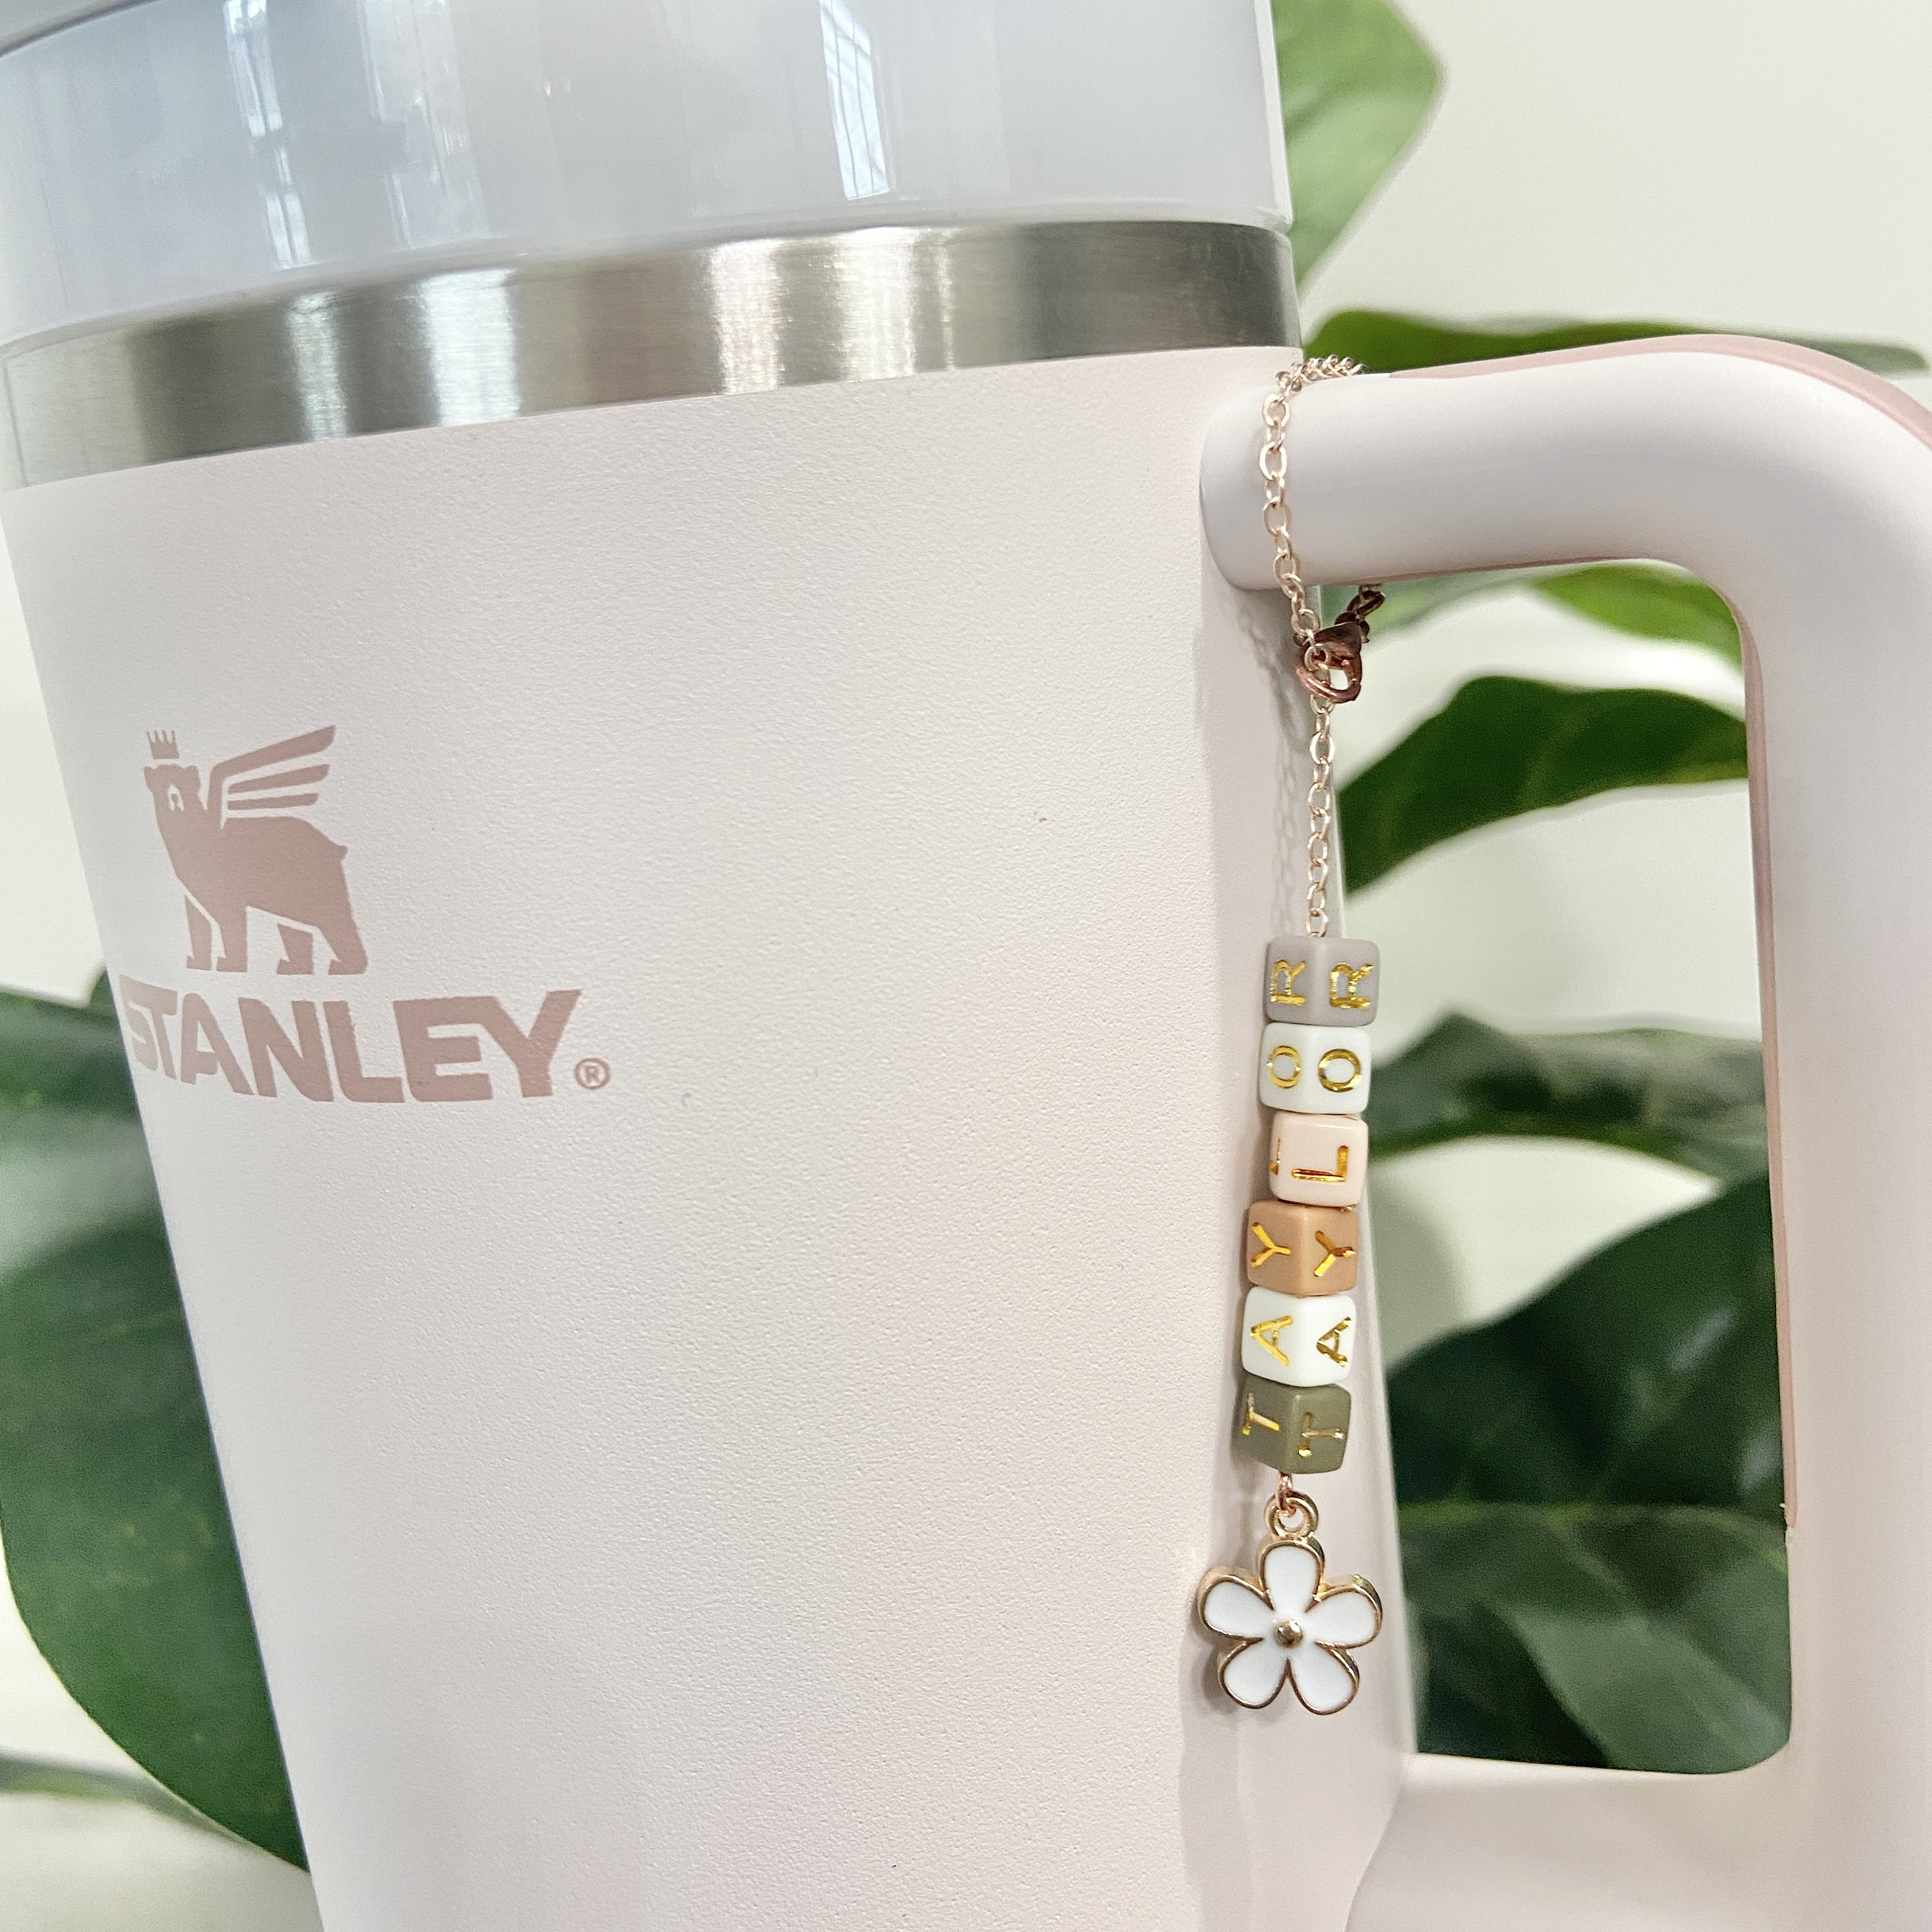 New Tumbler Charms in stock! Handmade from polymer clay! #stanley #st